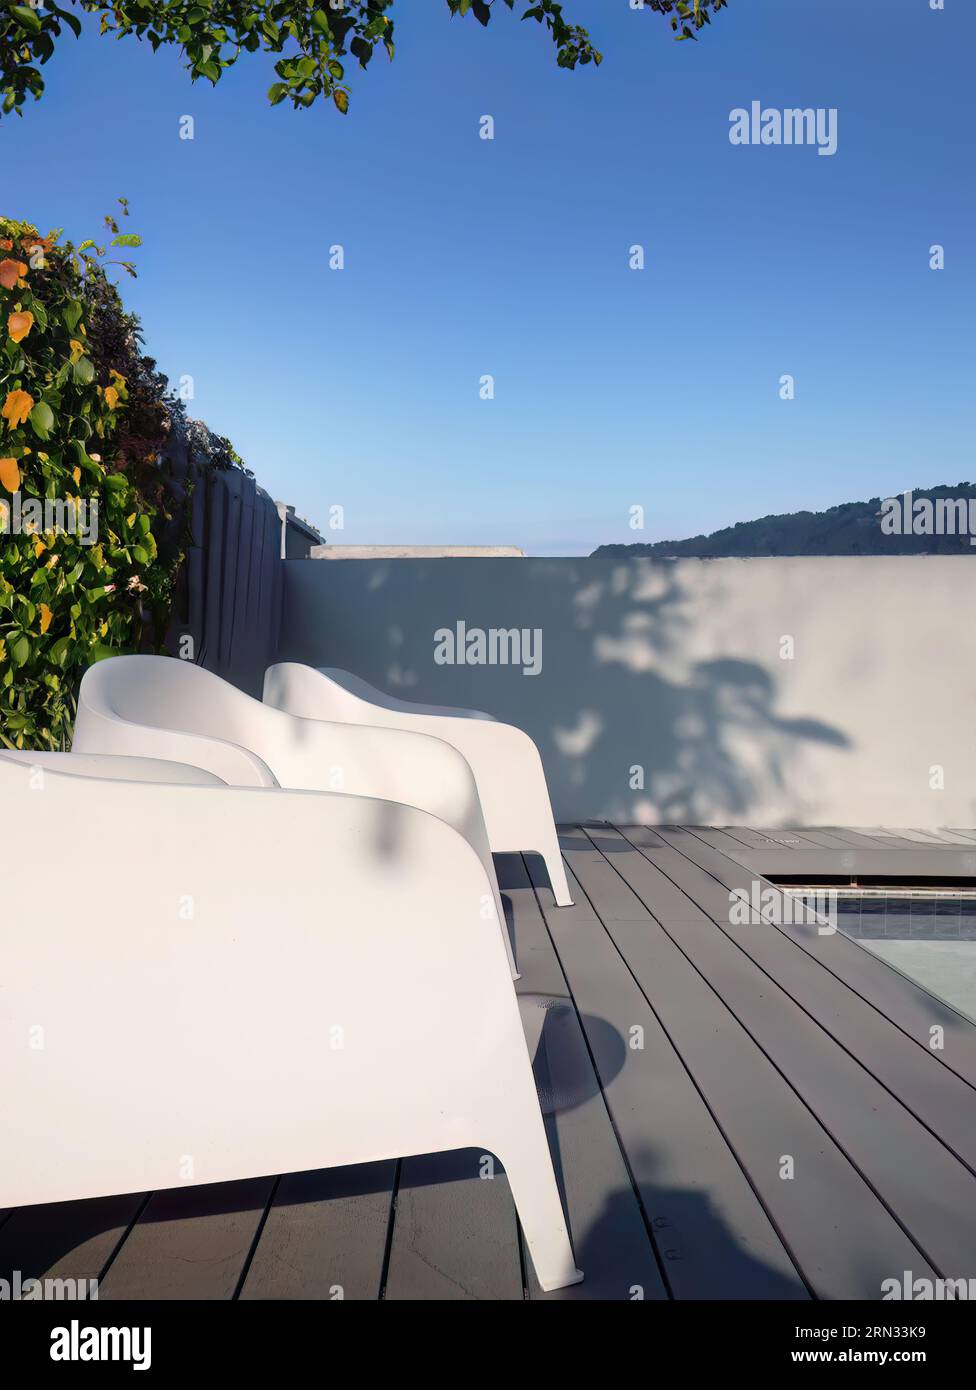 Modern design white plastic chairs at swimming pool side and outdoor garden, comfortable veranda decorated, wooden deck, back yard privacy space for r Stock Photo